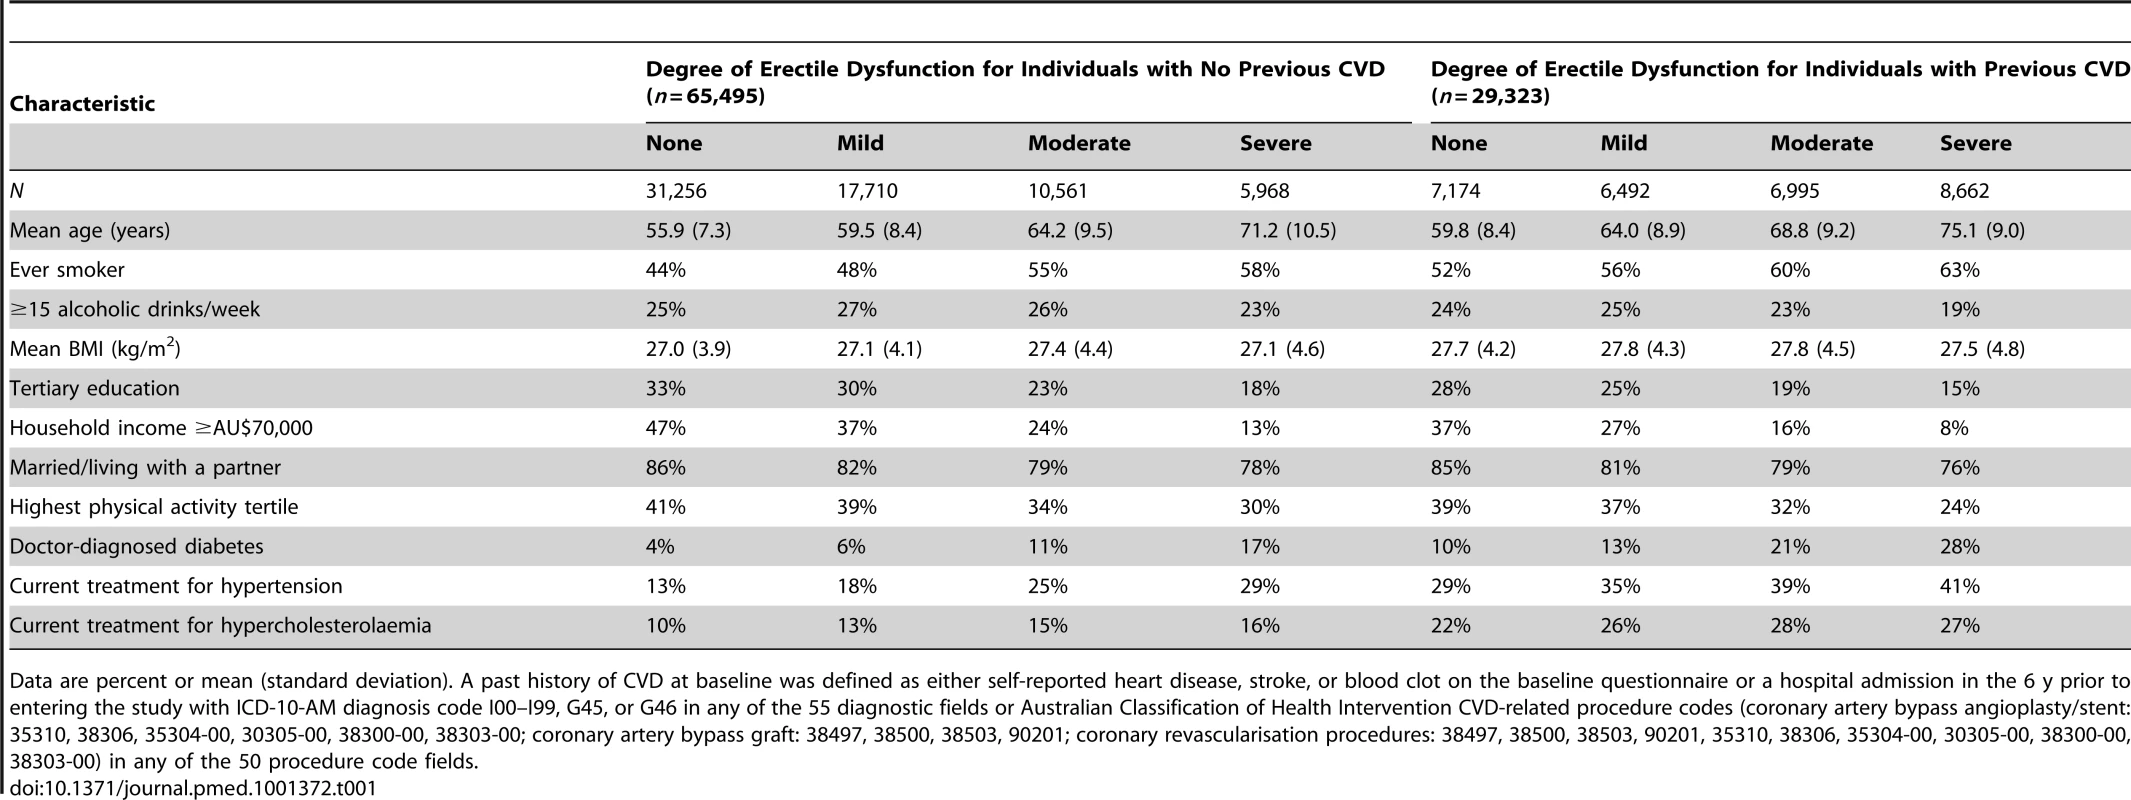 Characteristics of study population according to CVD history and degree of erectile dysfunction at baseline.